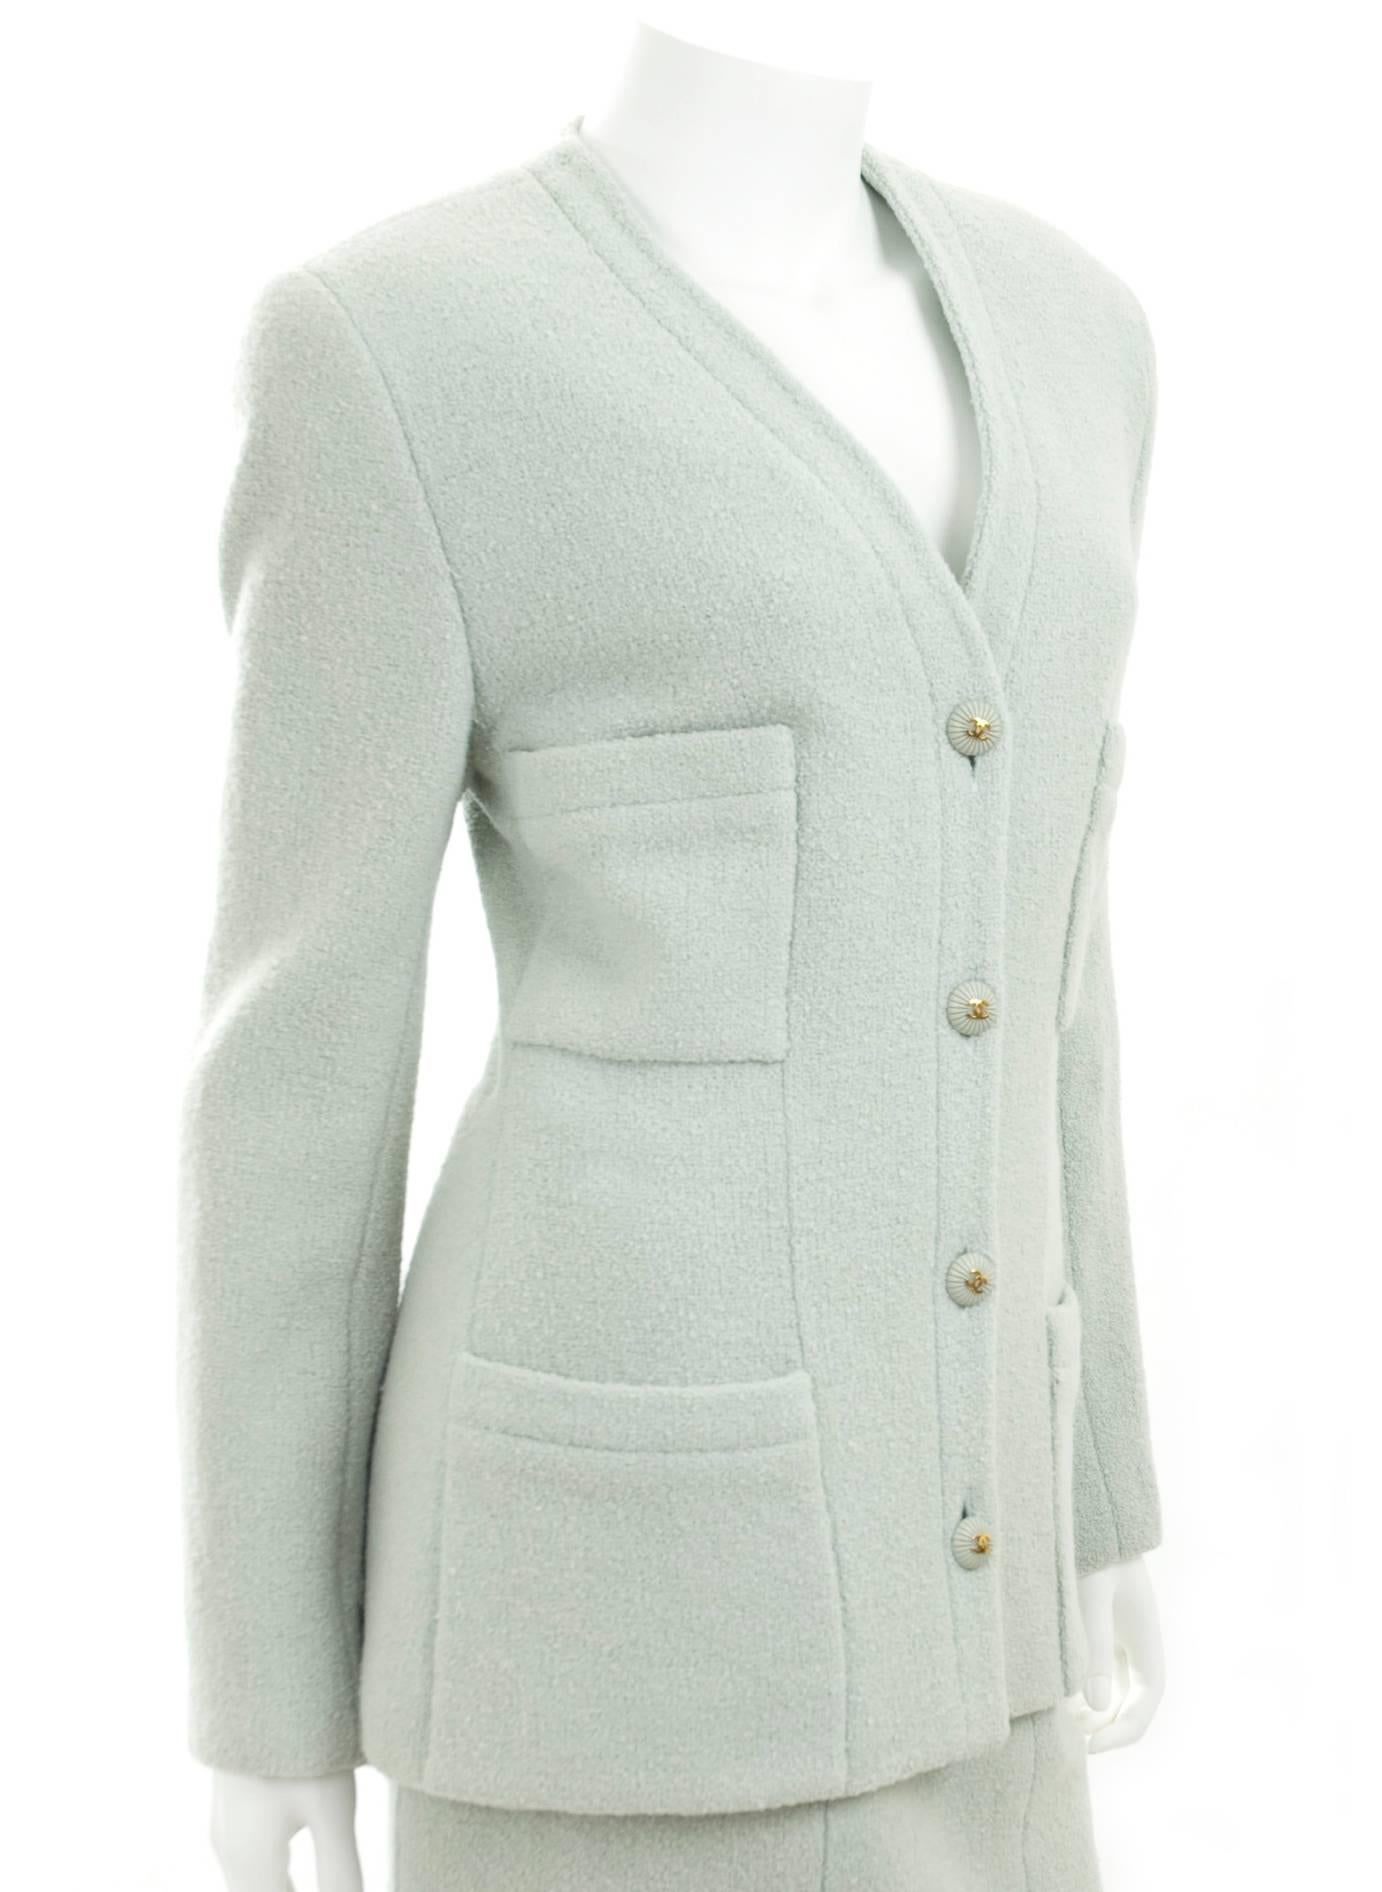 Women's Vintage 1993 Chanel Boucle Suit in Mint Green and CC Logo Buttons For Sale